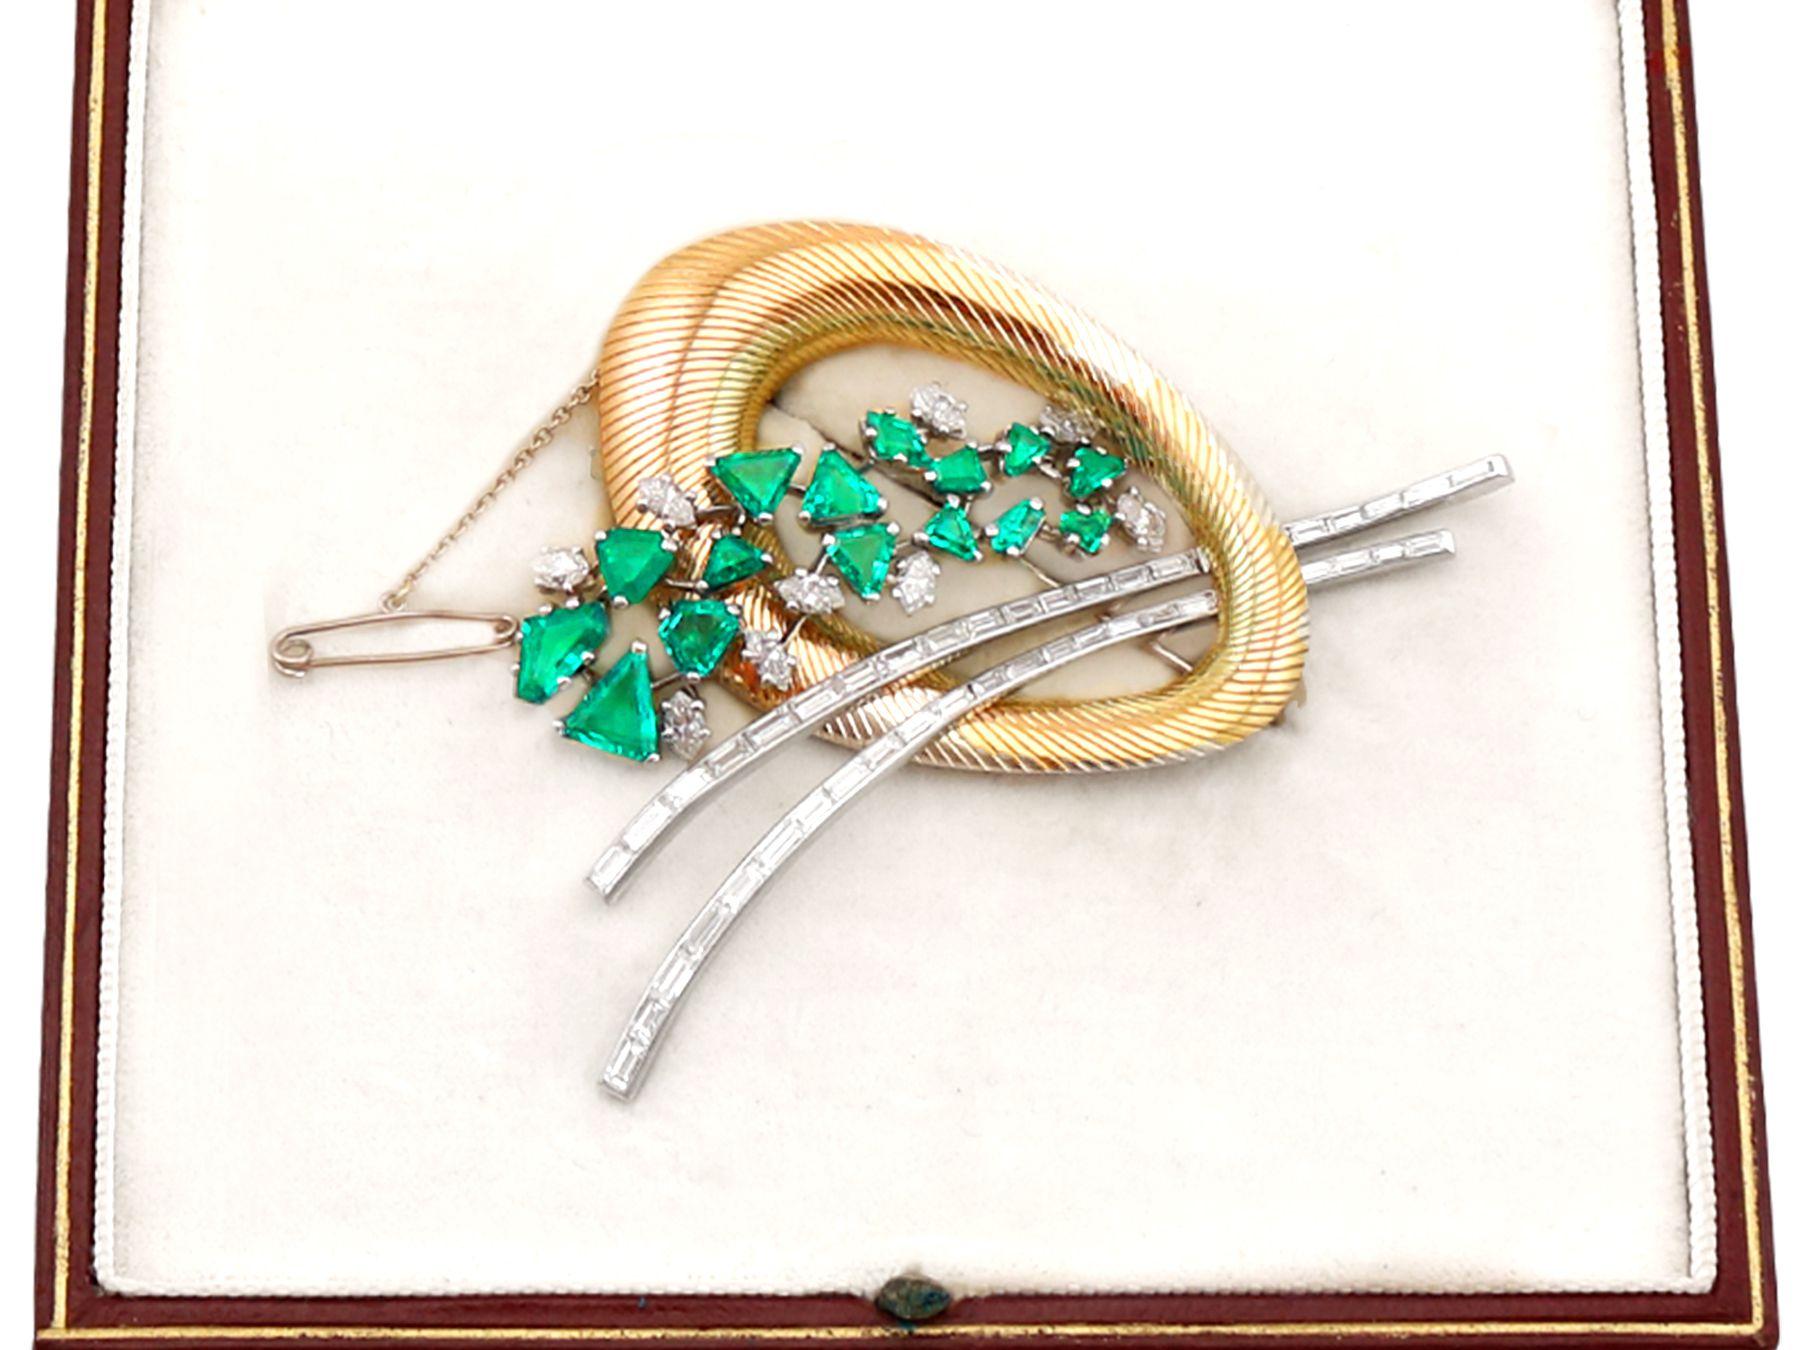 A stunning, fine and impressive, large antique 4.05 carat diamond and 6.07 carat emerald, 18 karat yellow gold and platinum Art Deco style brooch made by Garrards & Co Ltd; part of our diverse antique boxed jewelry and estate jewelry